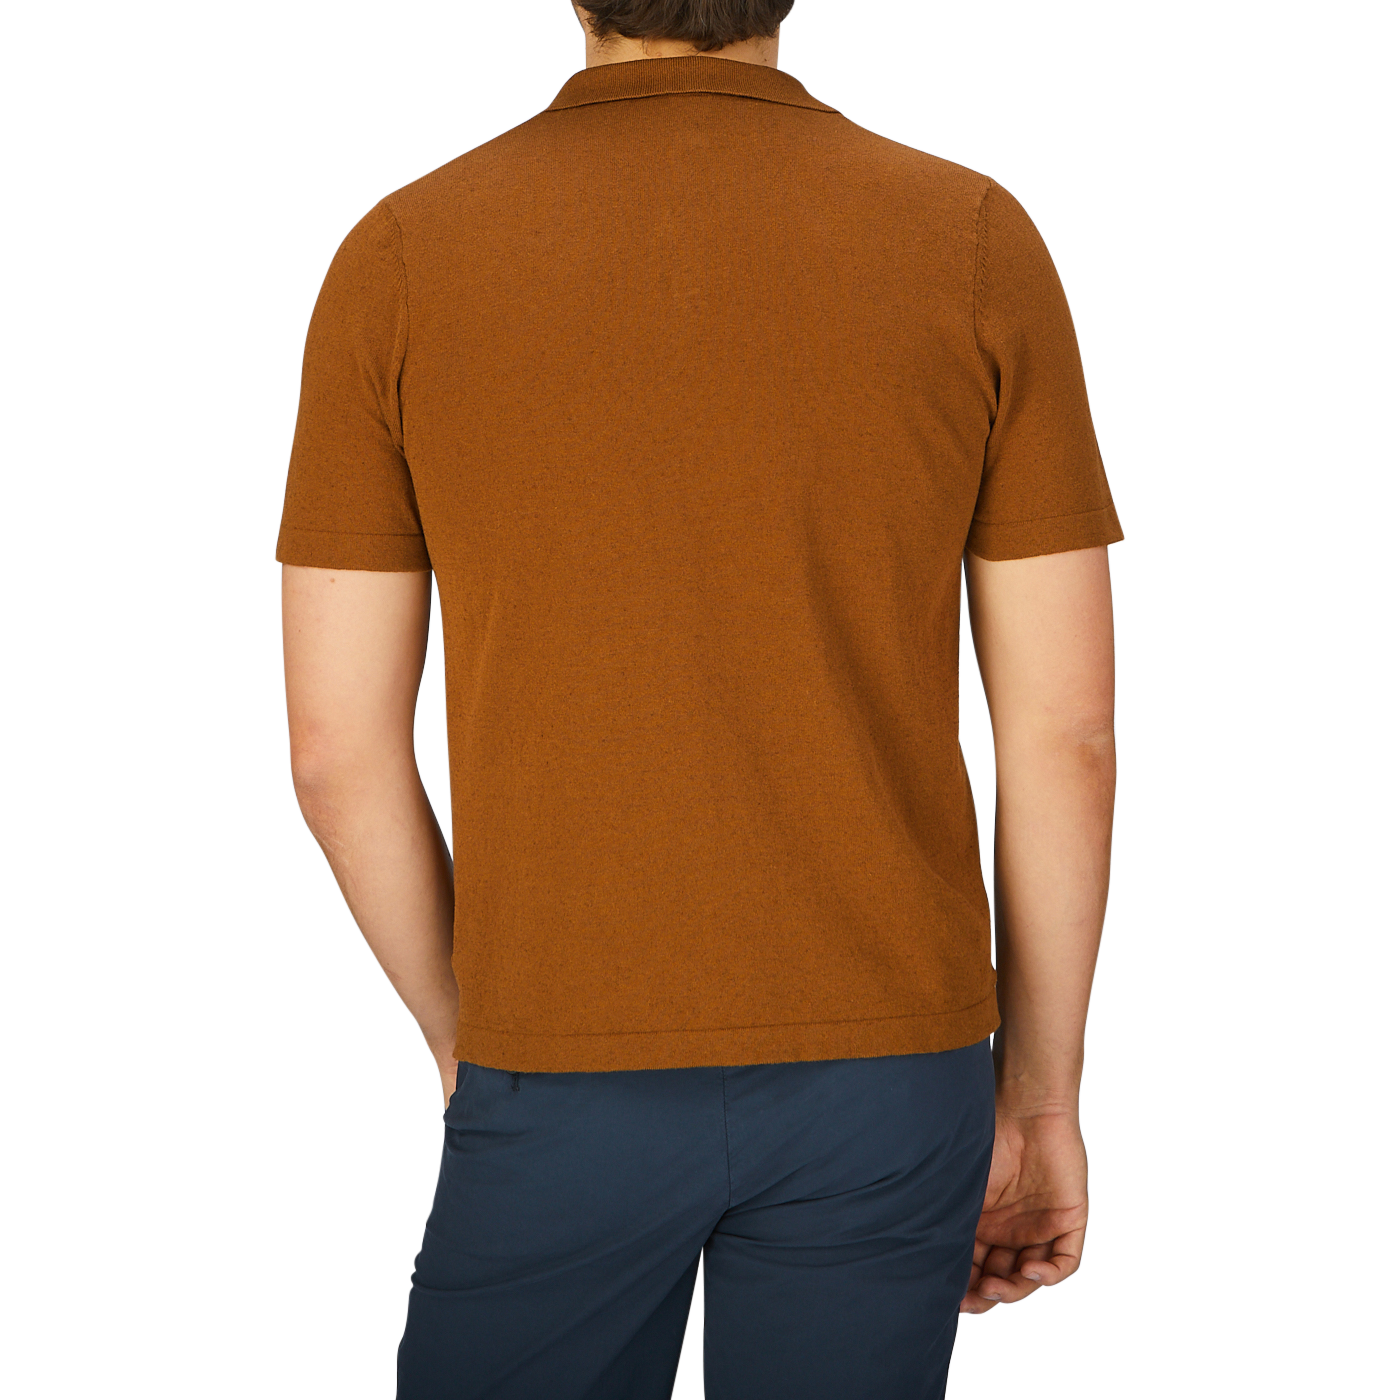 The back view of a man wearing a brown, slim fit G.R.P Tobacco Cotton Linen Polo Shirt.